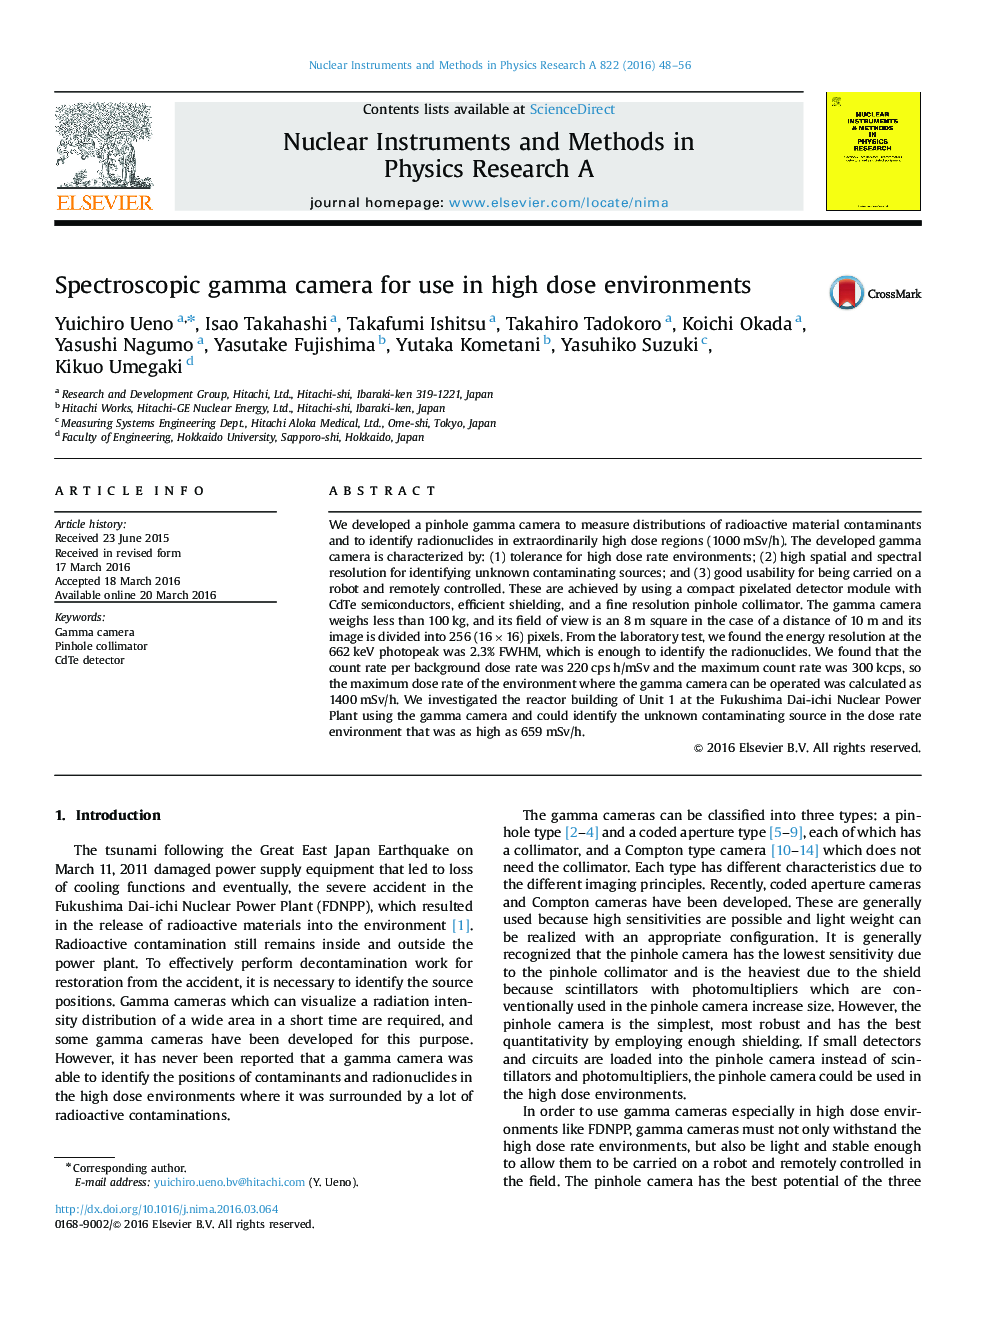 Spectroscopic gamma camera for use in high dose environments